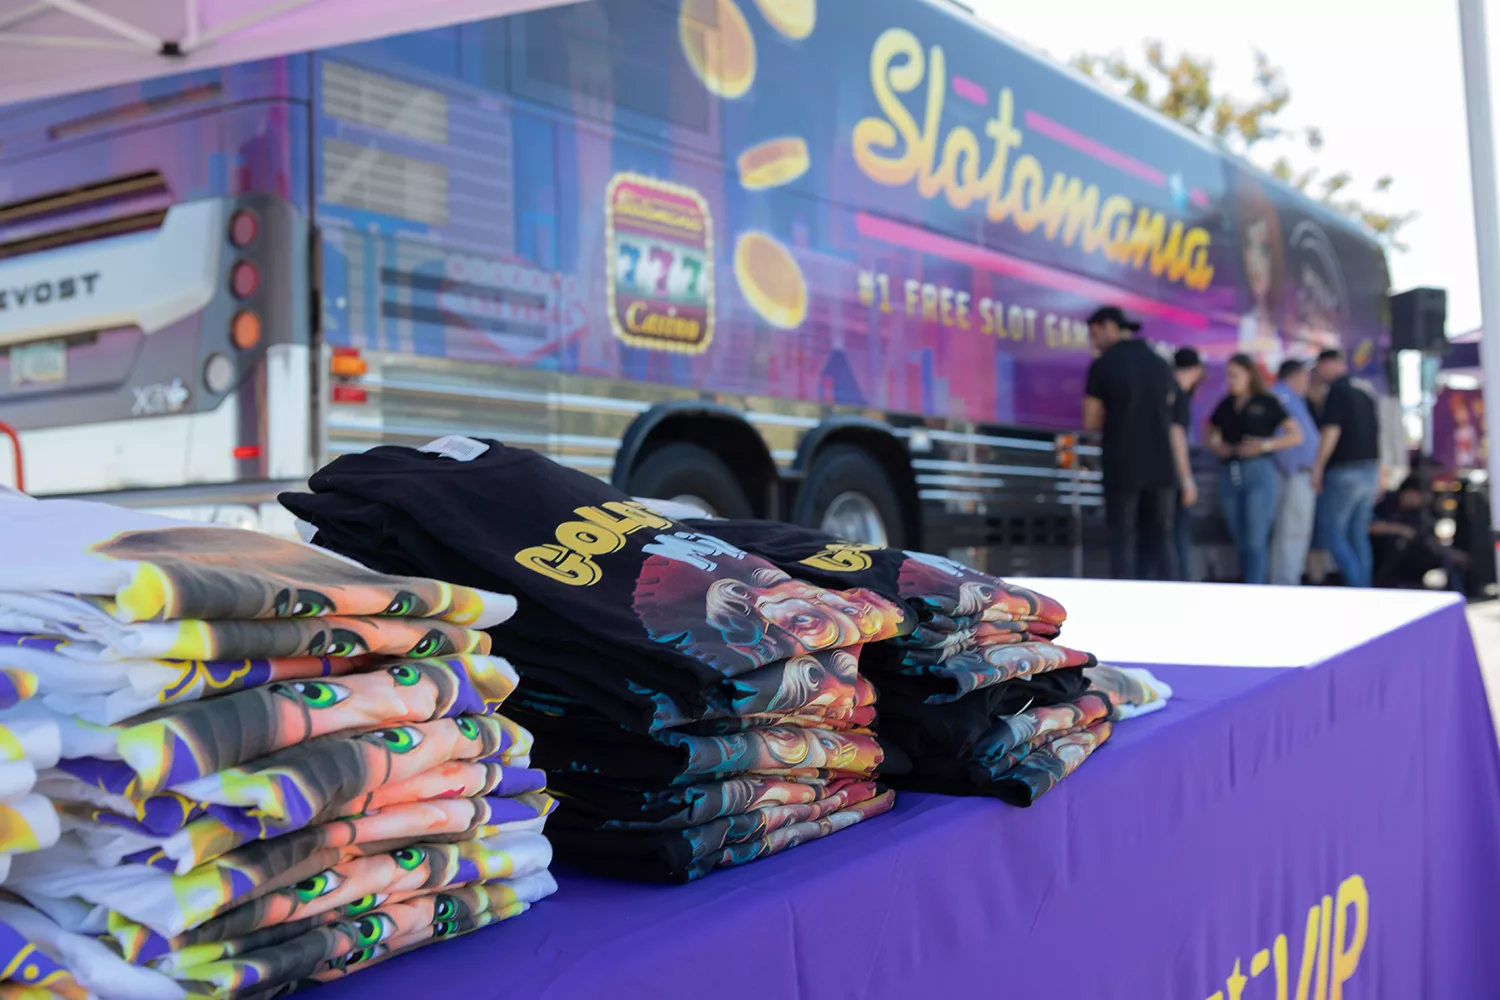 Colorful Slotomania promotional bus and stacked t-shirts at an event.